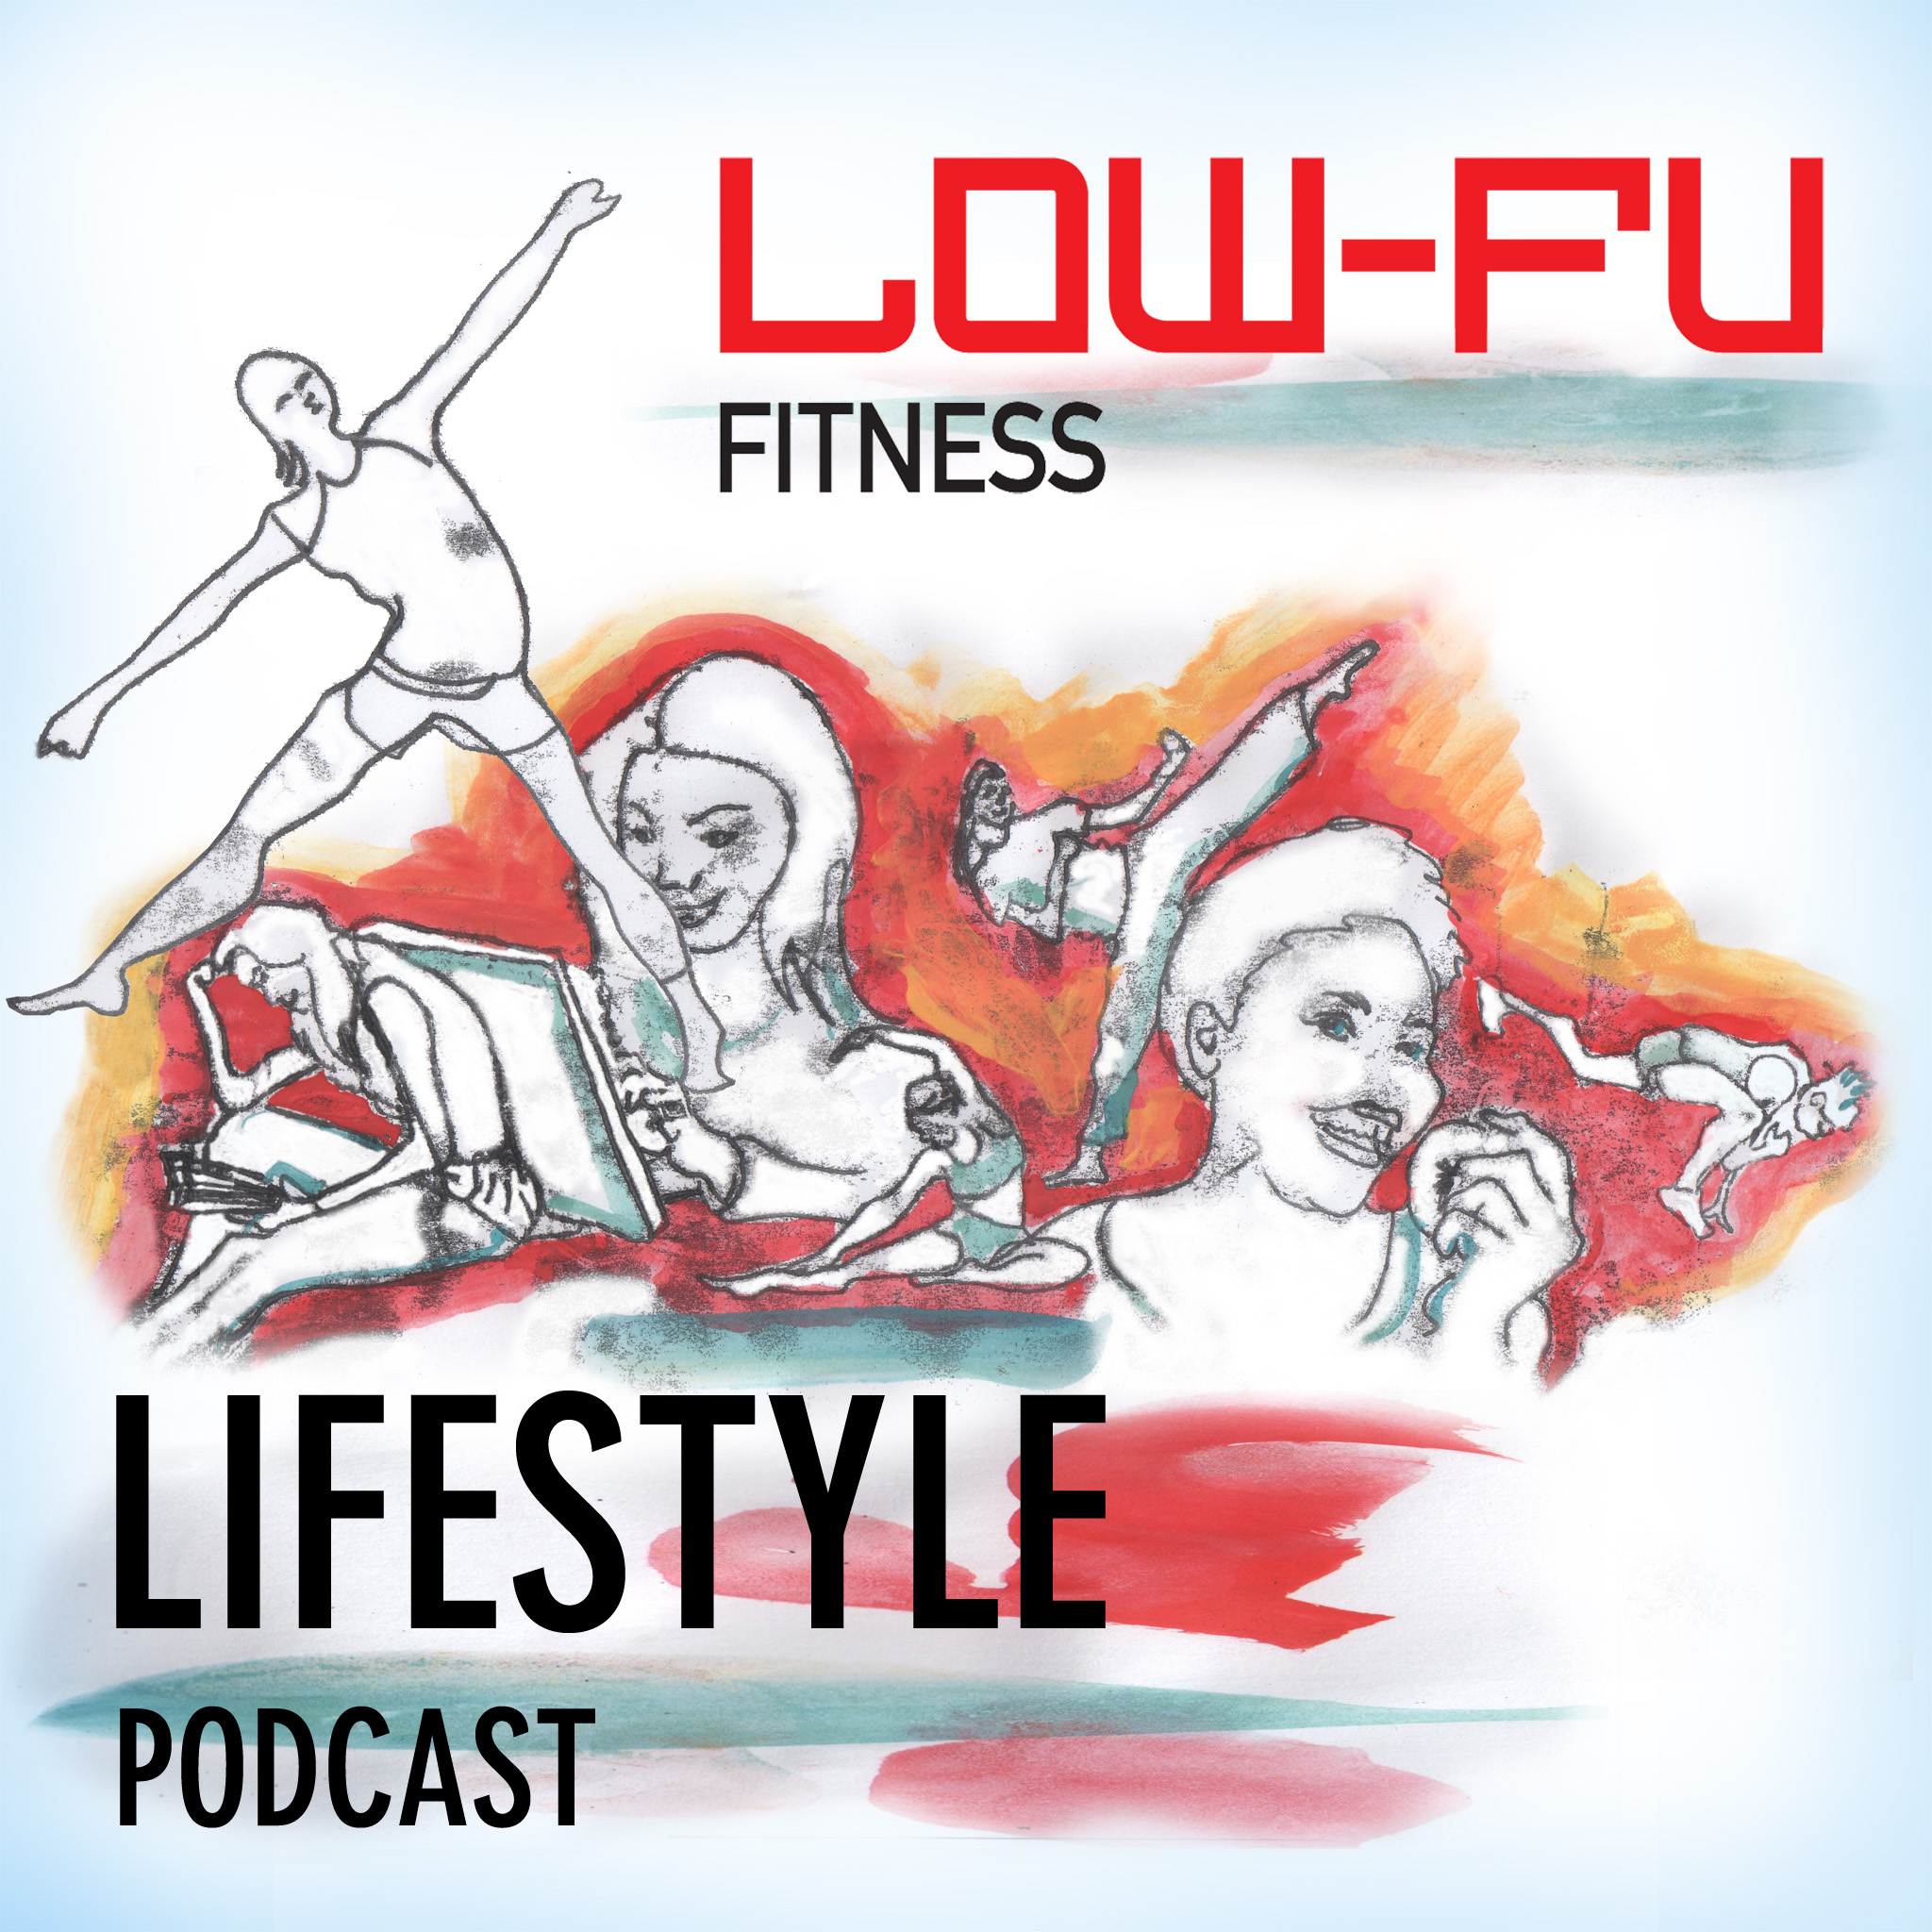 Episode 6: Kickboxing In A Fitness Class